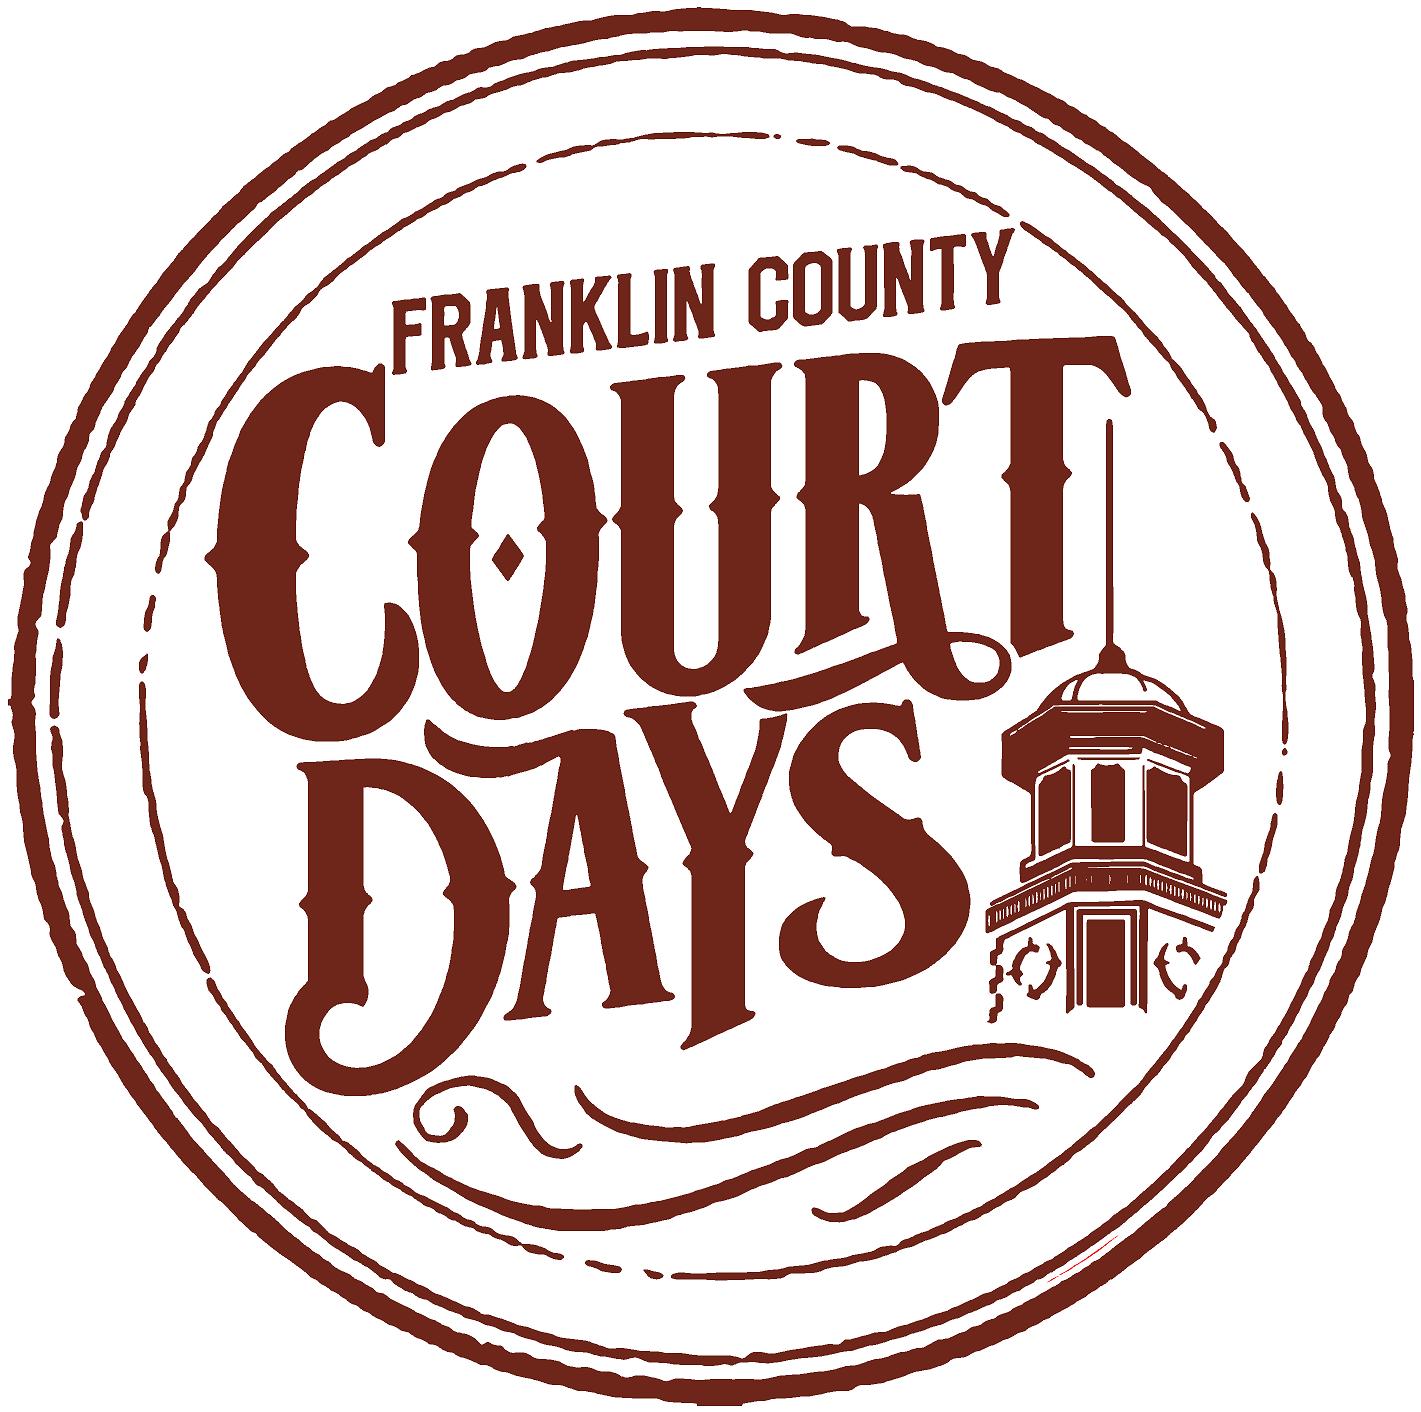 Celebrate Court Days in Franklin County on Saturday June 13